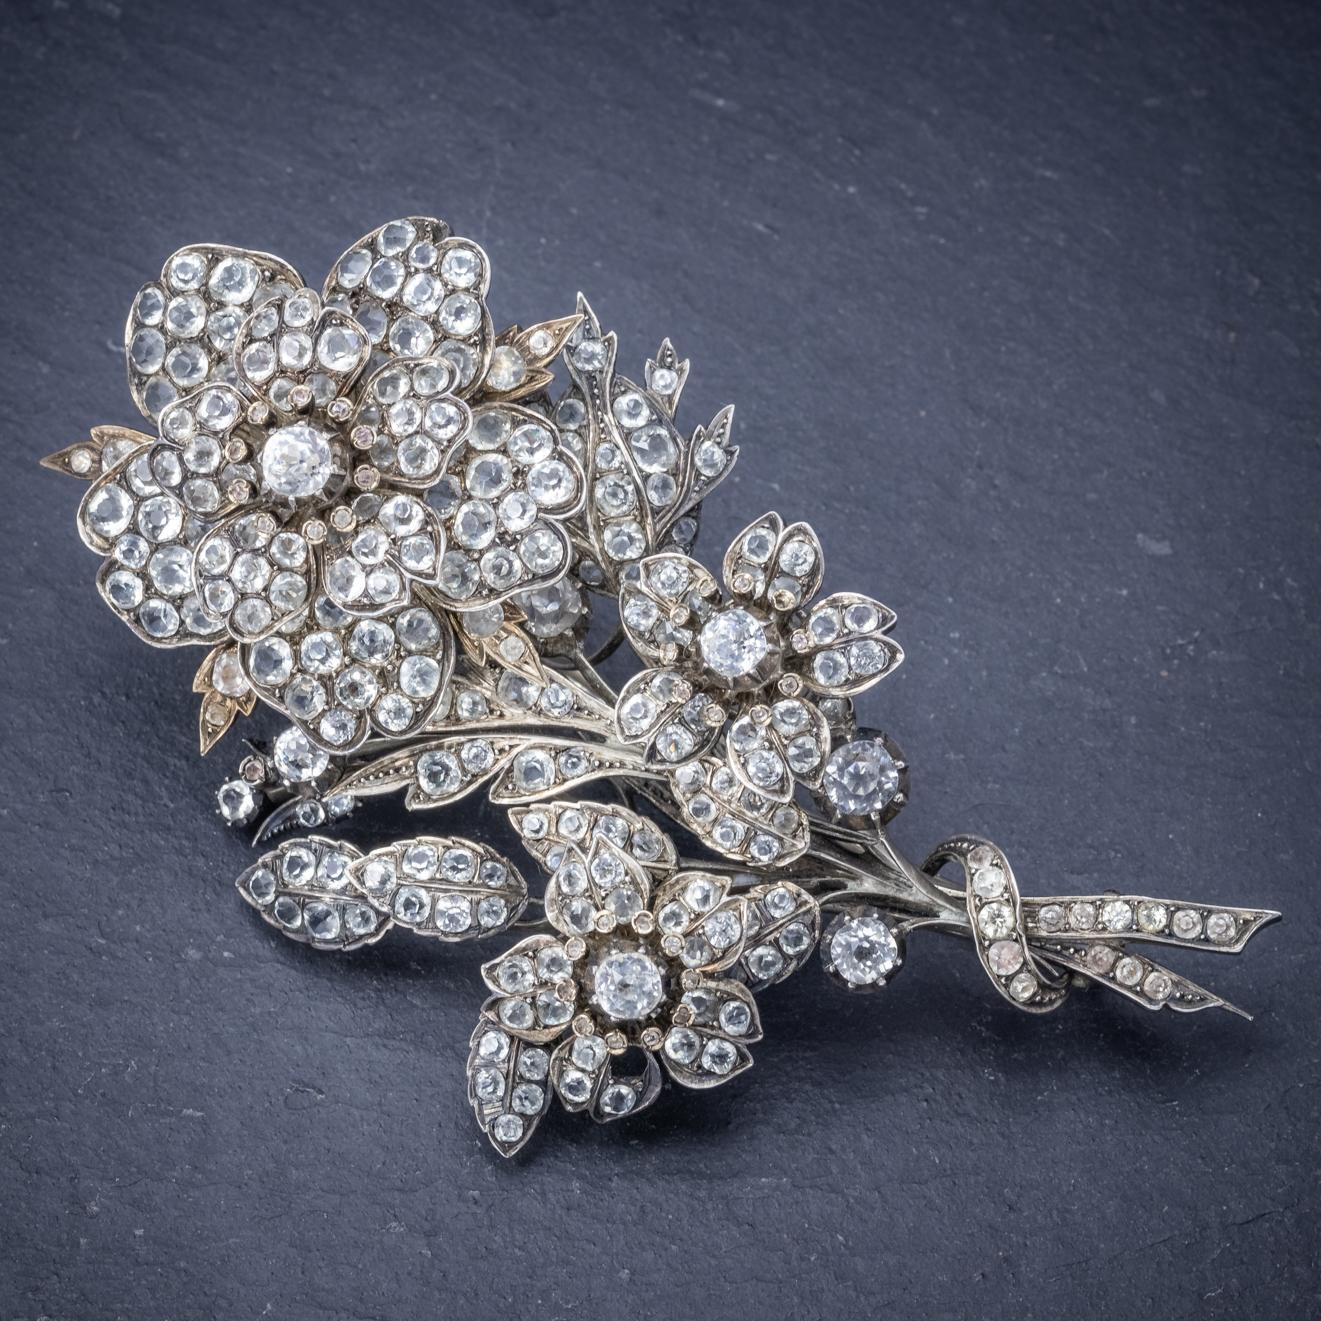 A spectacular antique French brooch from the early 20th Century depicting a bouquet of flowers decorated with old cut Paste Stones which simulate the sparkle and beauty of Diamonds. The brooch is expertly made with overlaid leaves and petals that